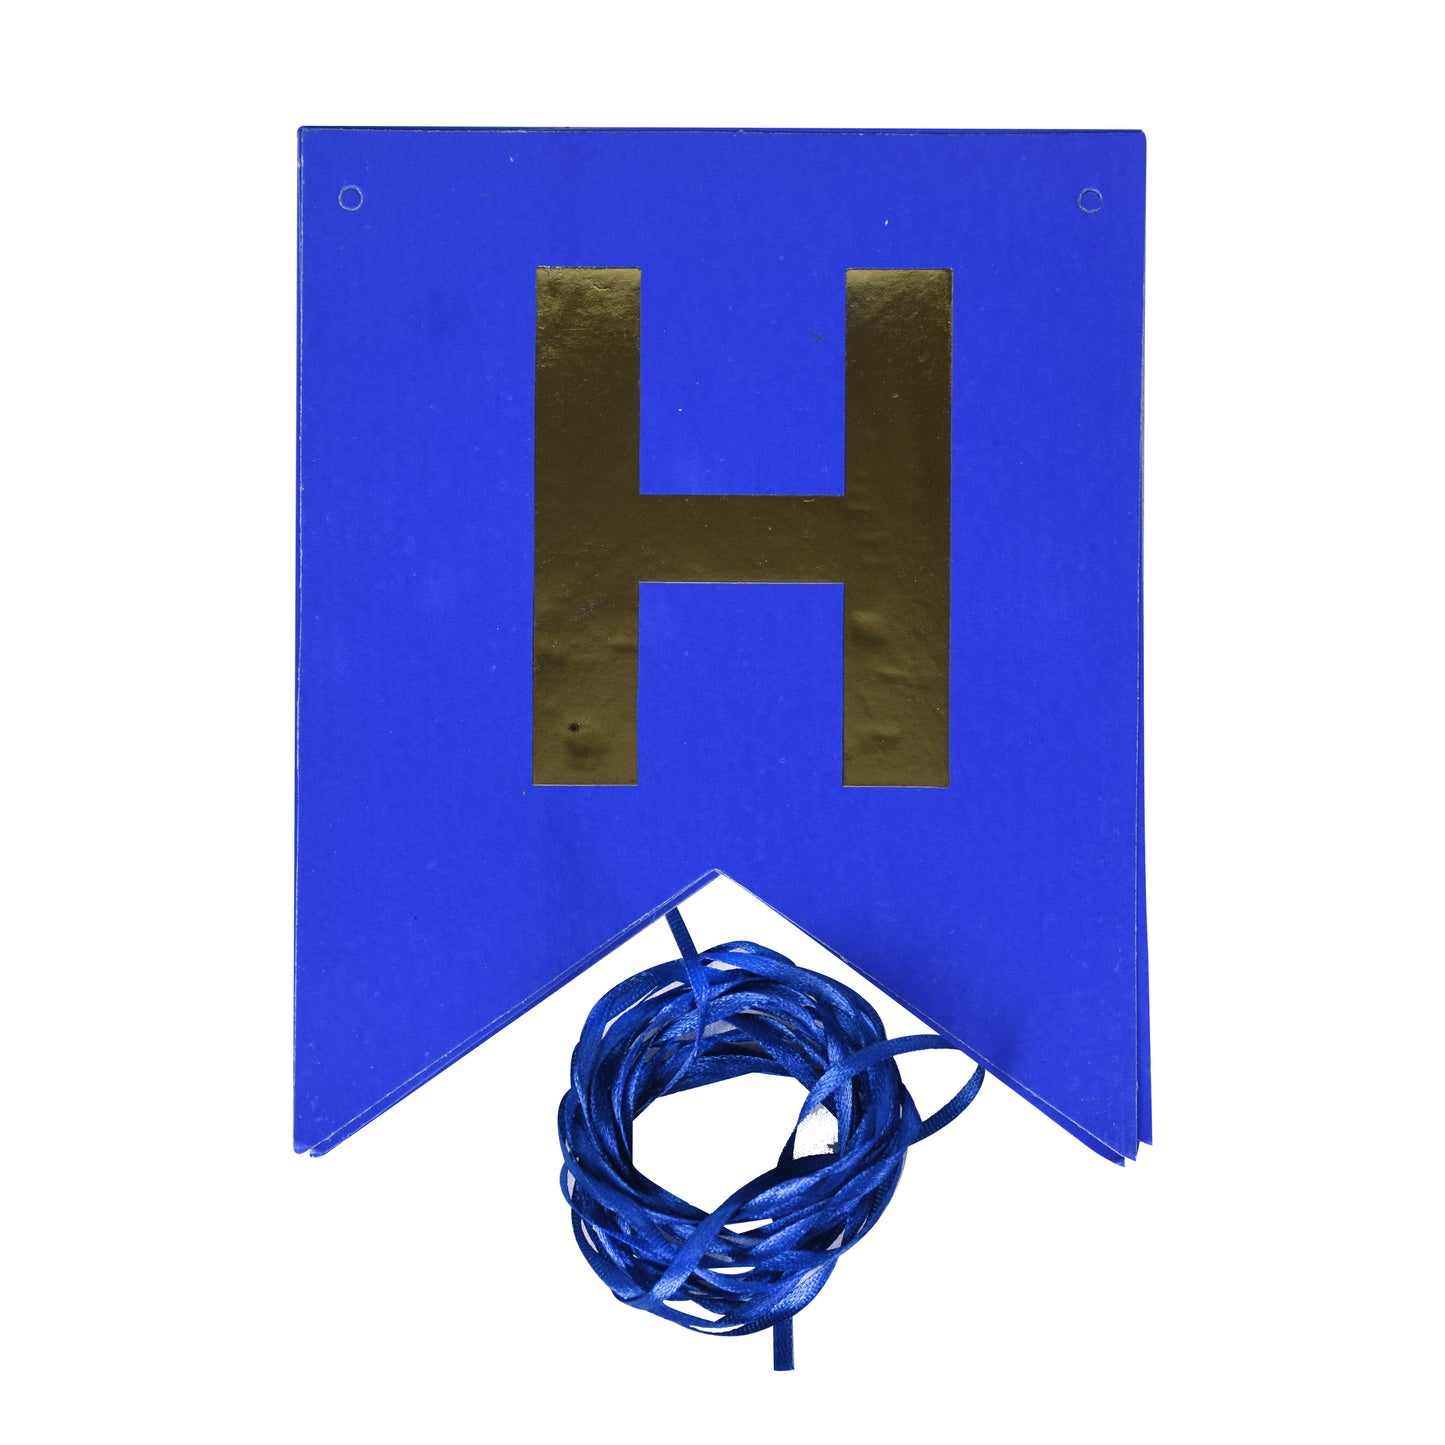 Happy Birthday Blue Bunting Banner For Birthday Party Decoration